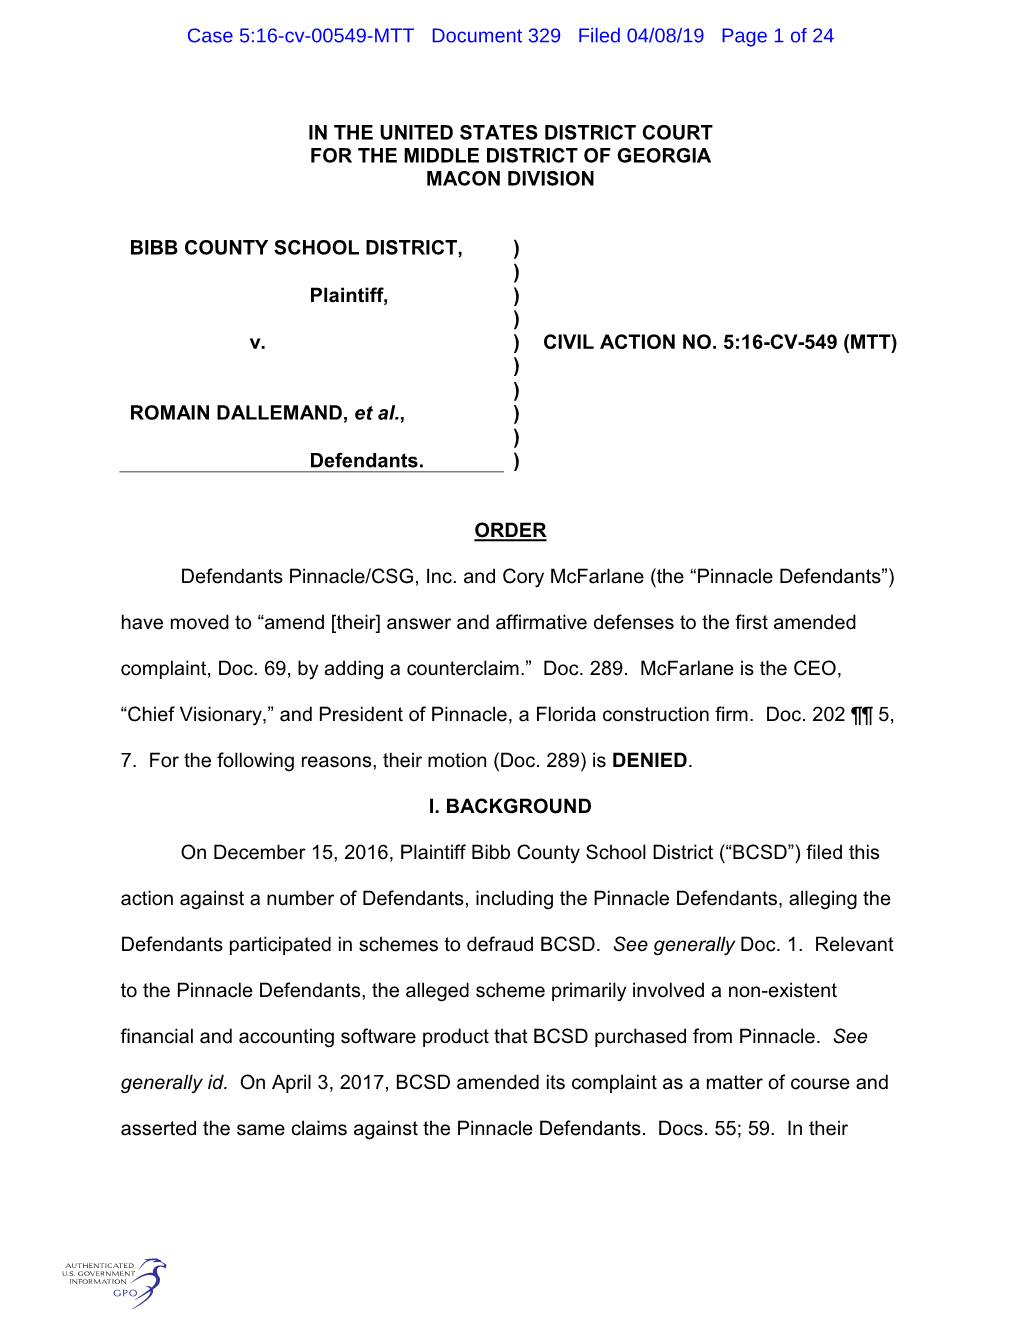 Case 5:16-Cv-00549-MTT Document 329 Filed 04/08/19 Page 1 of 24